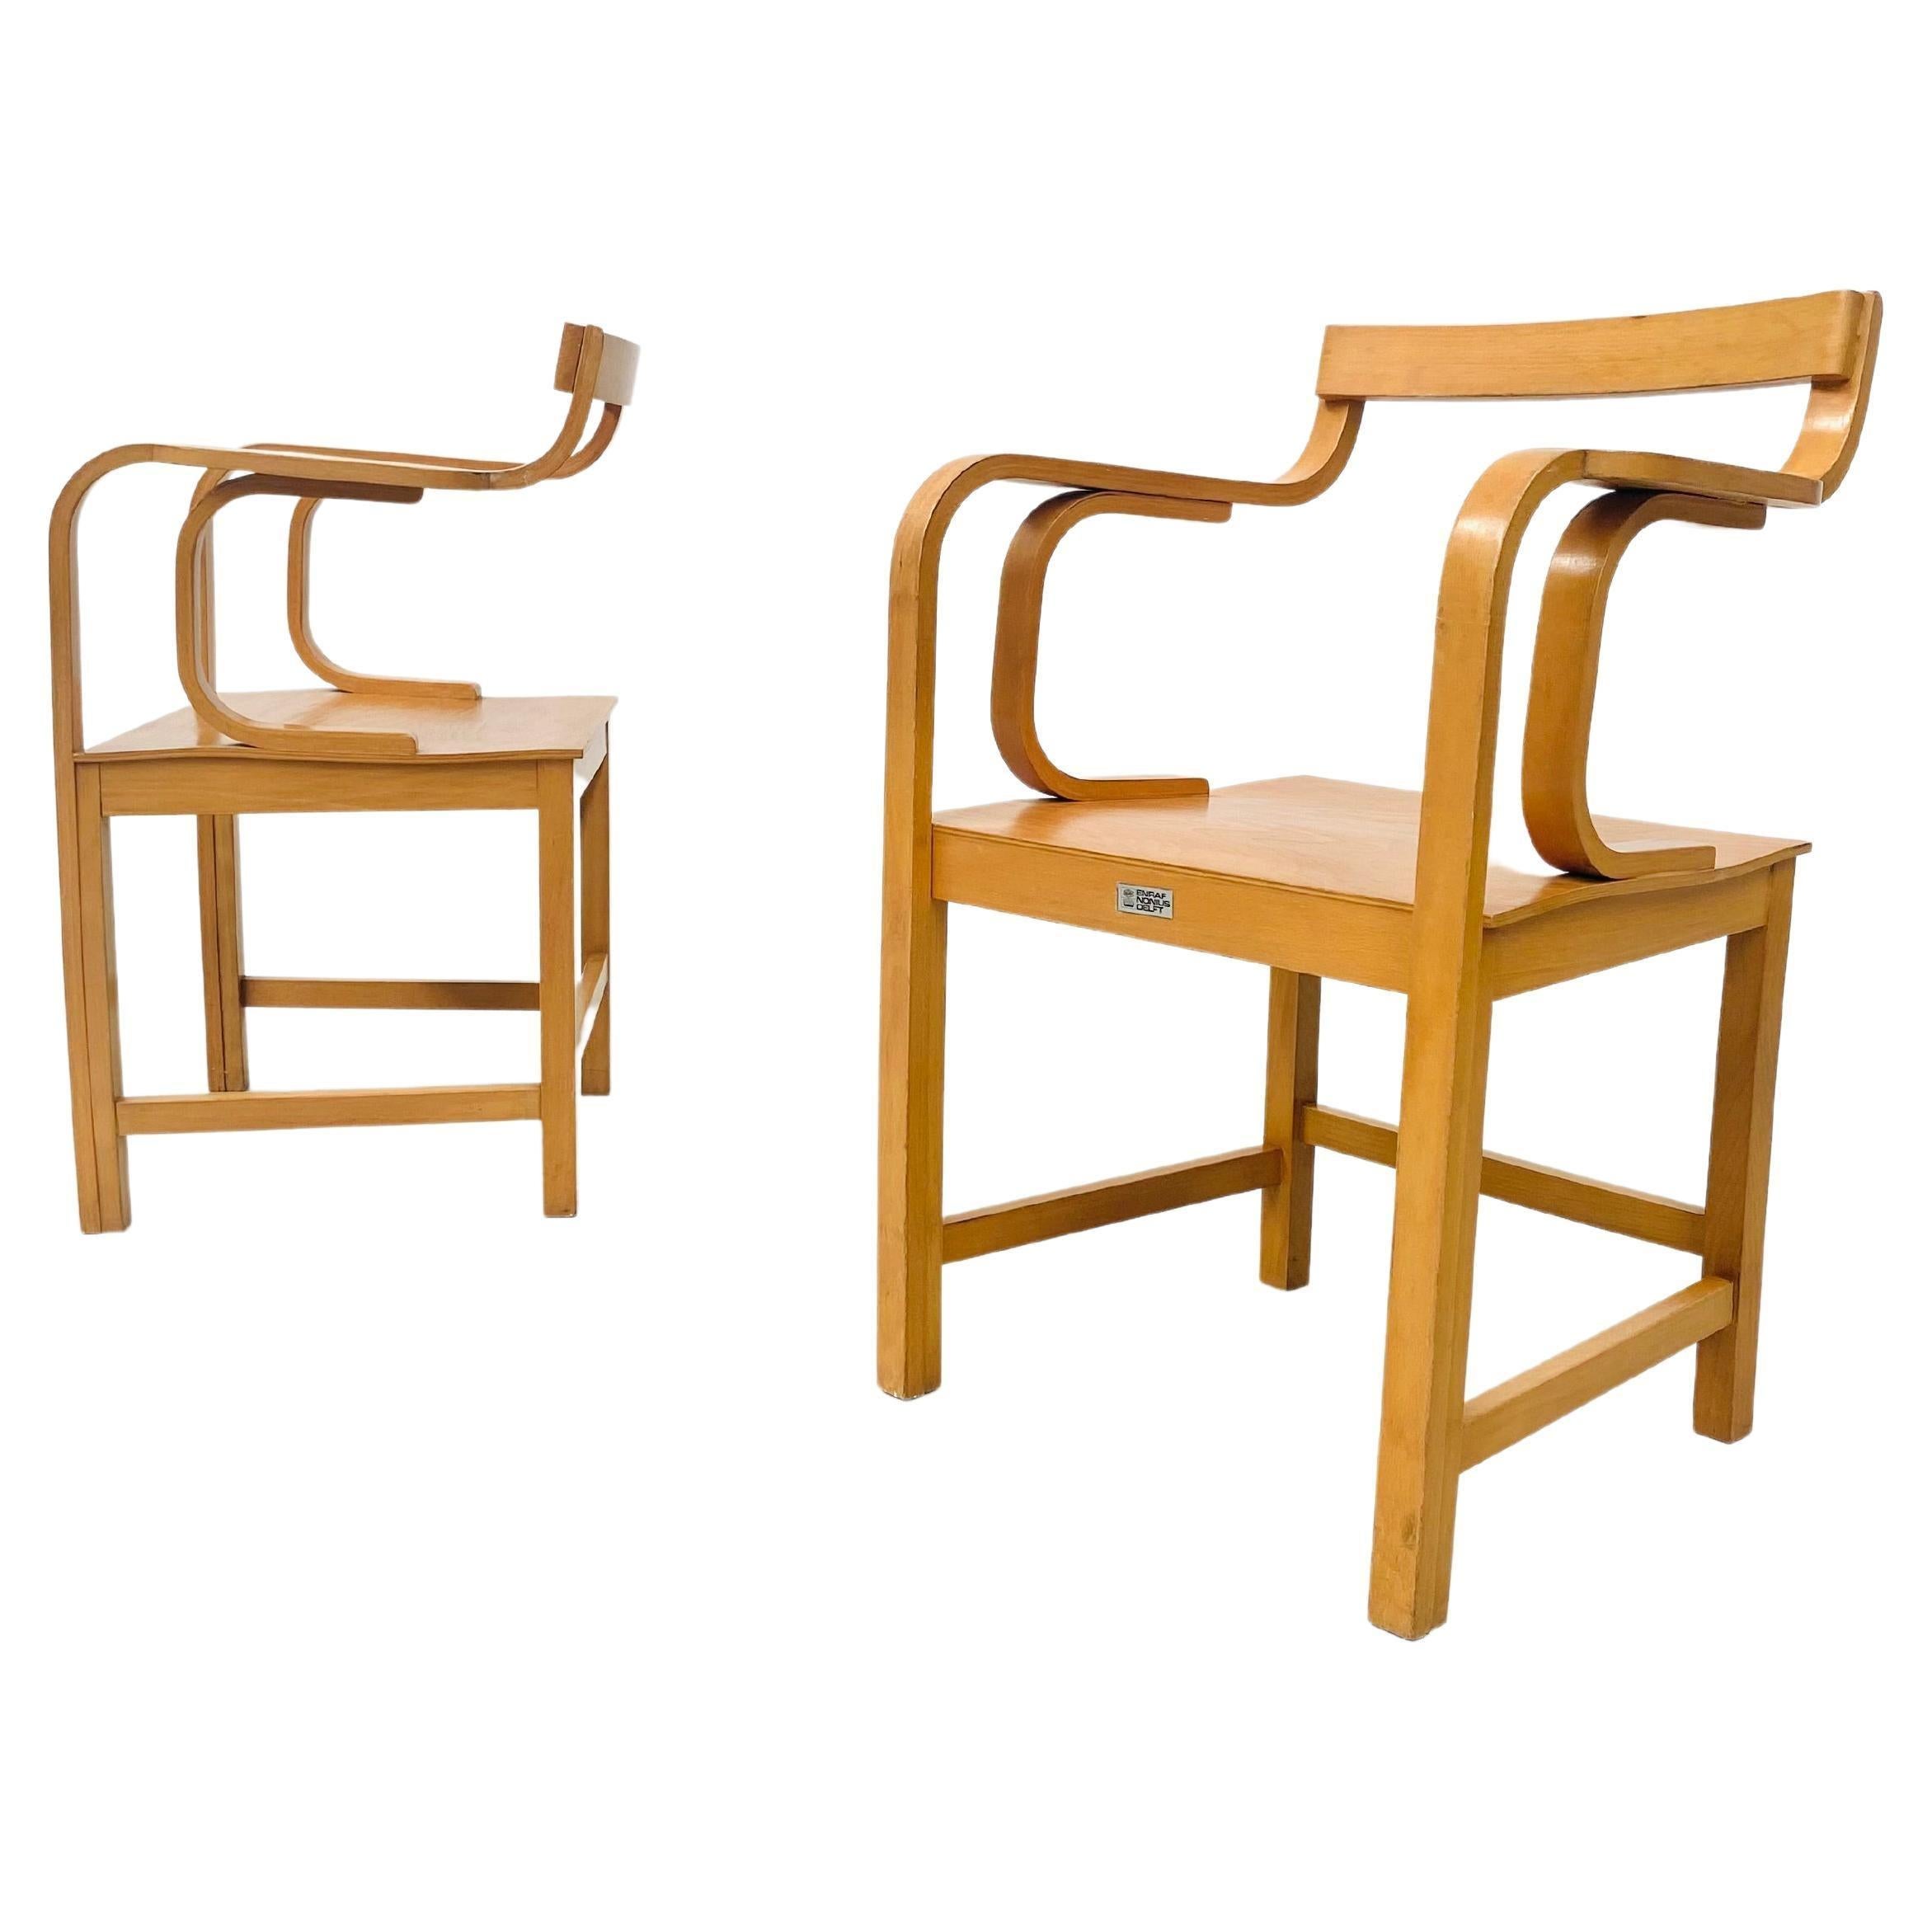 These 2 Dutch designed chairs were designed produced by Enraf Nonius in Delft, the Netherlands. The chairs are made of beech plywood and no screw or nail has been used in the design. The design is inspired by the Scandinavian Modern style in the